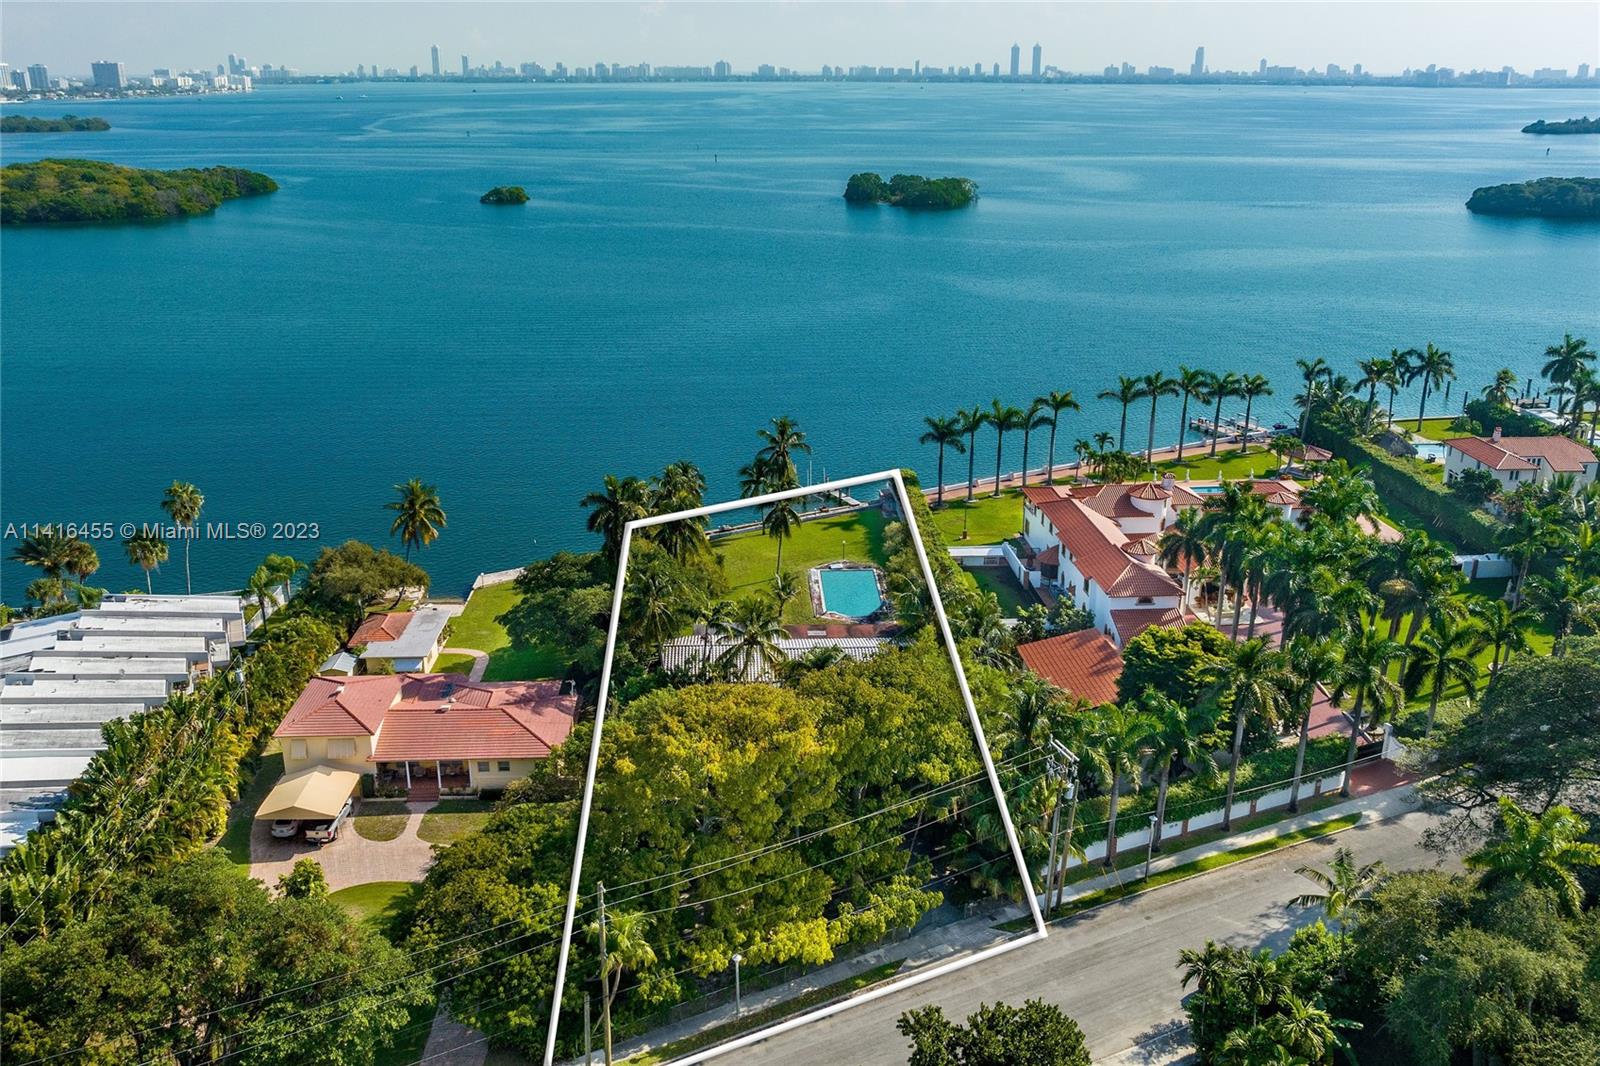 Build your dream home with some of the most stunning wide bay views in the city. Located in the historic Morningside neighborhood this waterfront property boasts a 29,300 square foot lot with 100’ of water frontage on the wide bay. Experience breathtaking sunrises and breezes from your waterfront lot. Live moments from all that Miami has to offer, major highways, the Miami Design District and world class dining, shopping, sports arenas, the Adrienne Arsht Center for the Performing Arts and just one short bridge away from Miami Beach and the ocean.